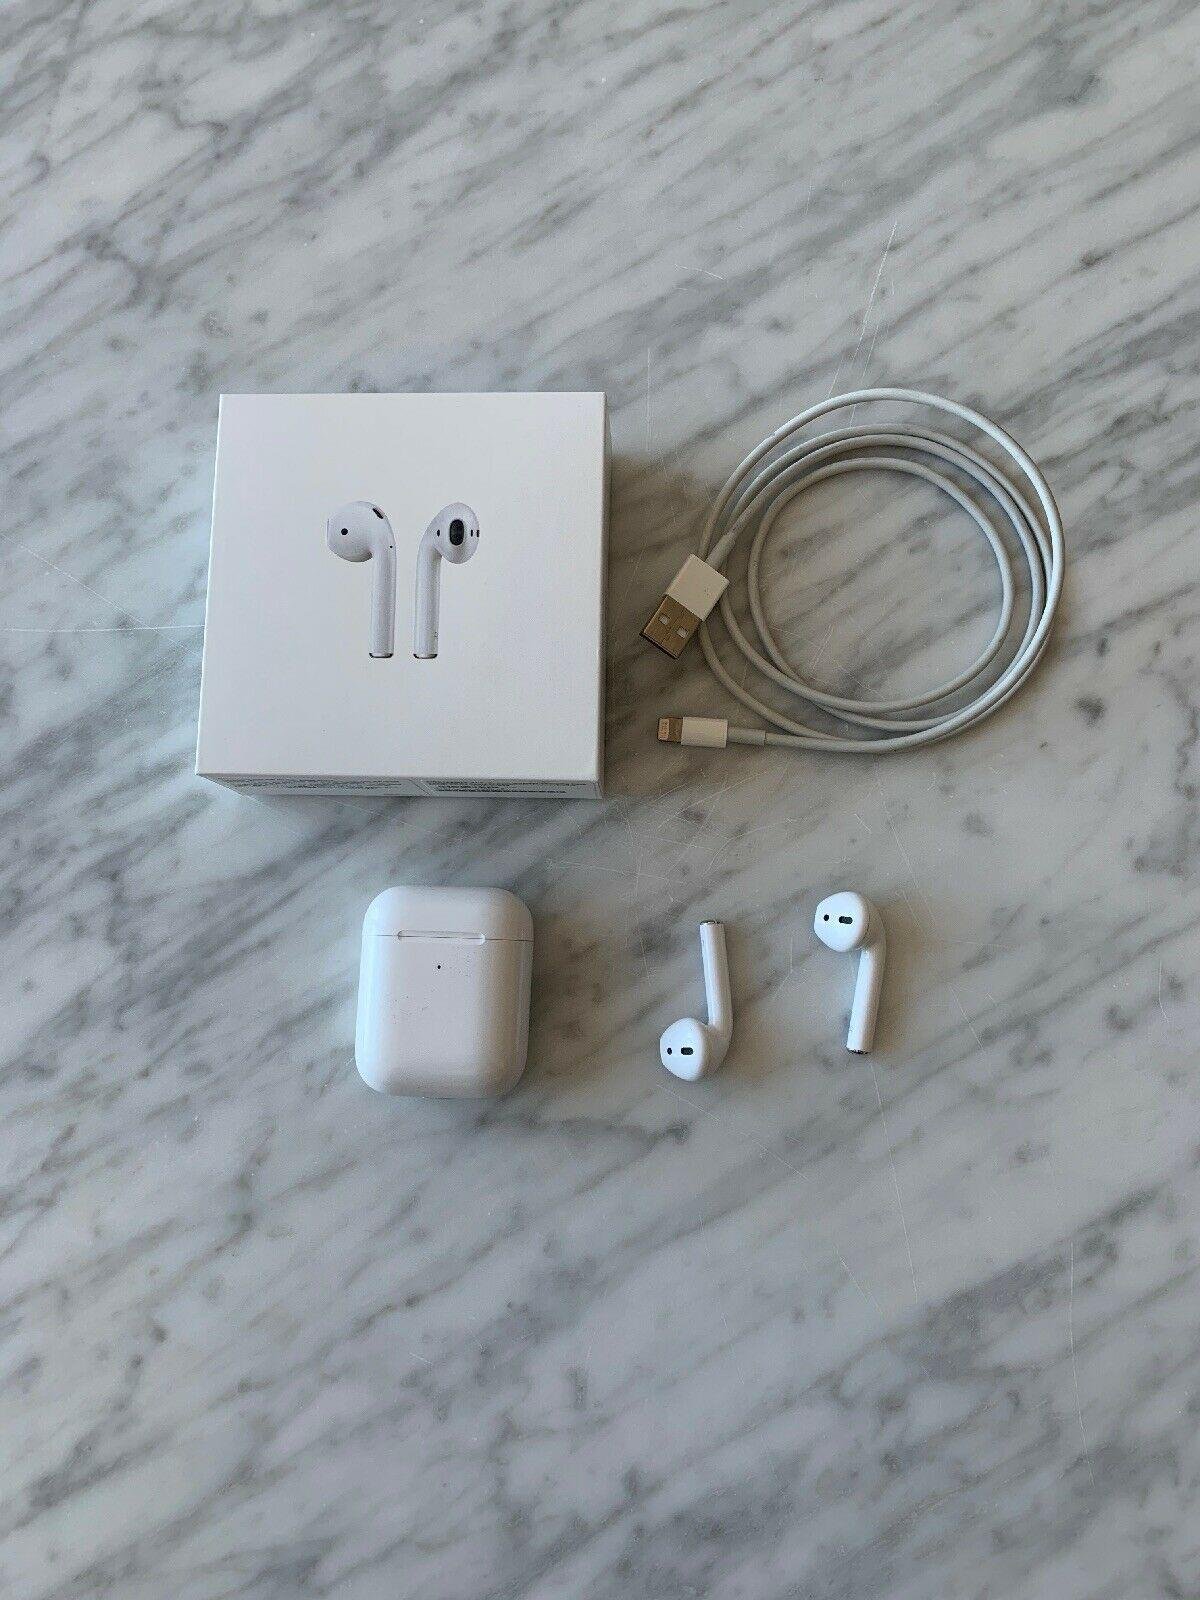 Apple AirPods 2nd Generation Bluetooth Earbuds with Wireless Charging Case White 2